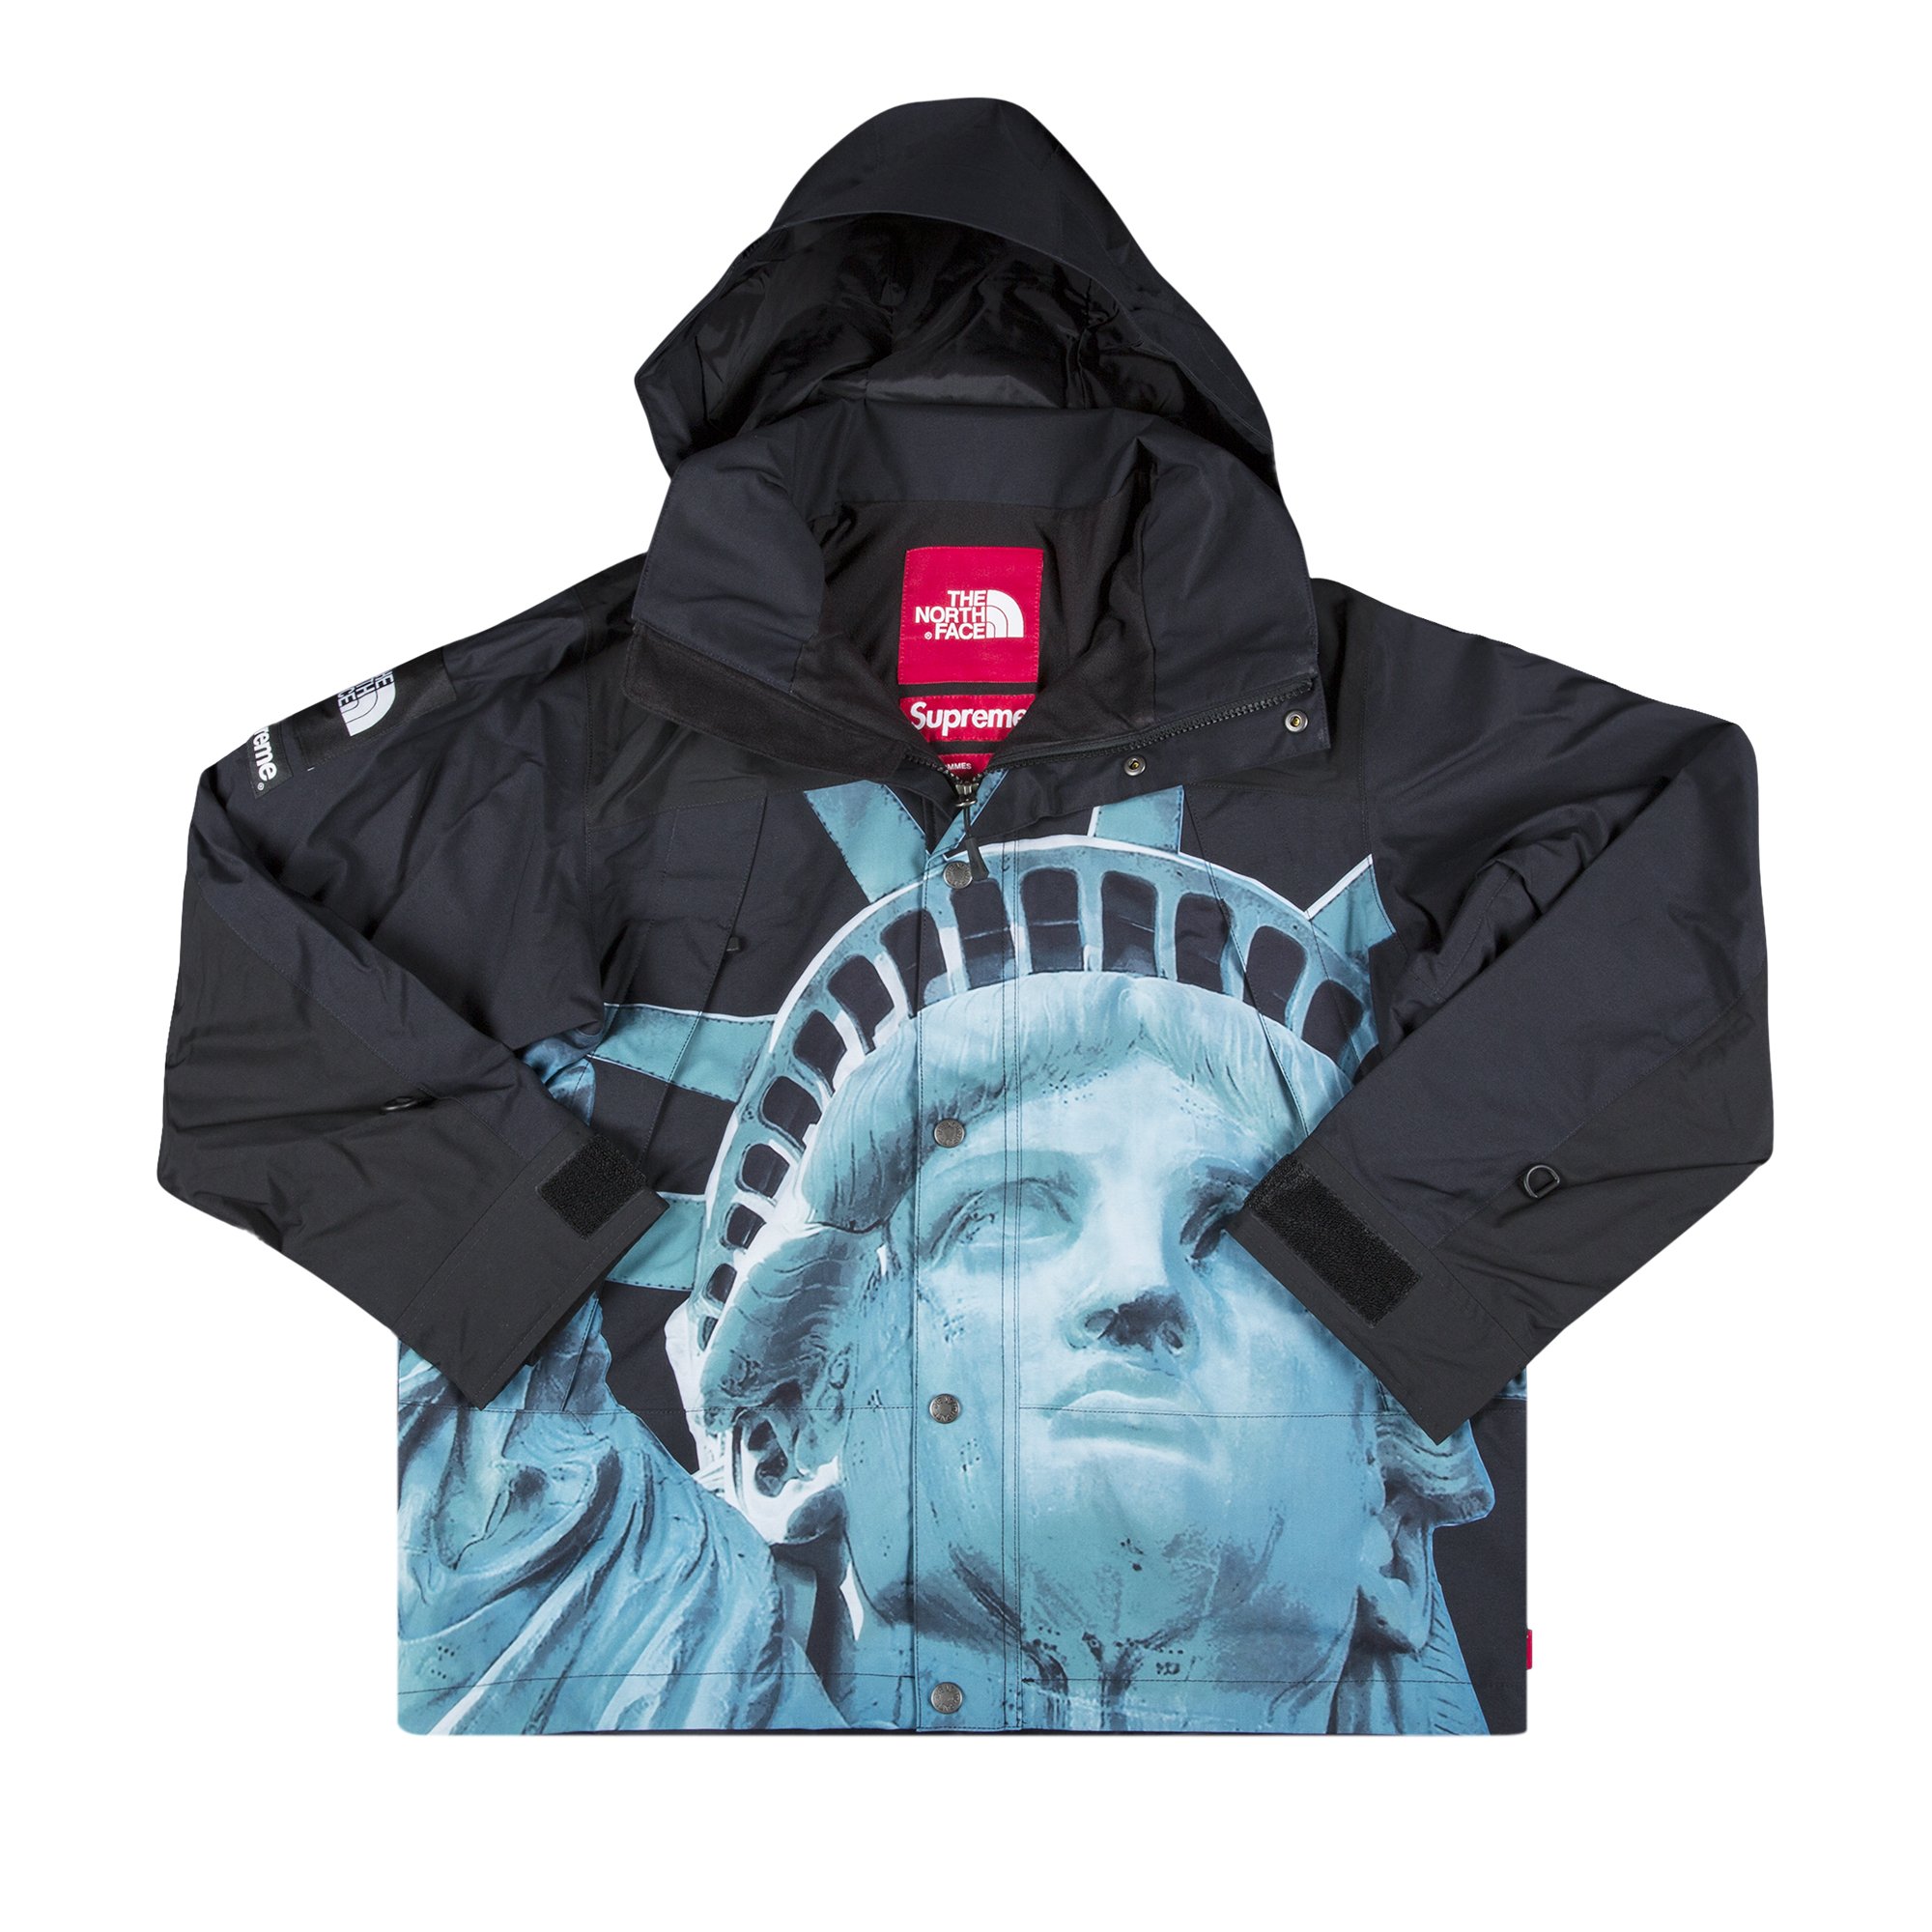 Buy Supreme x The North Face Statue Of Liberty Mountain Jacket